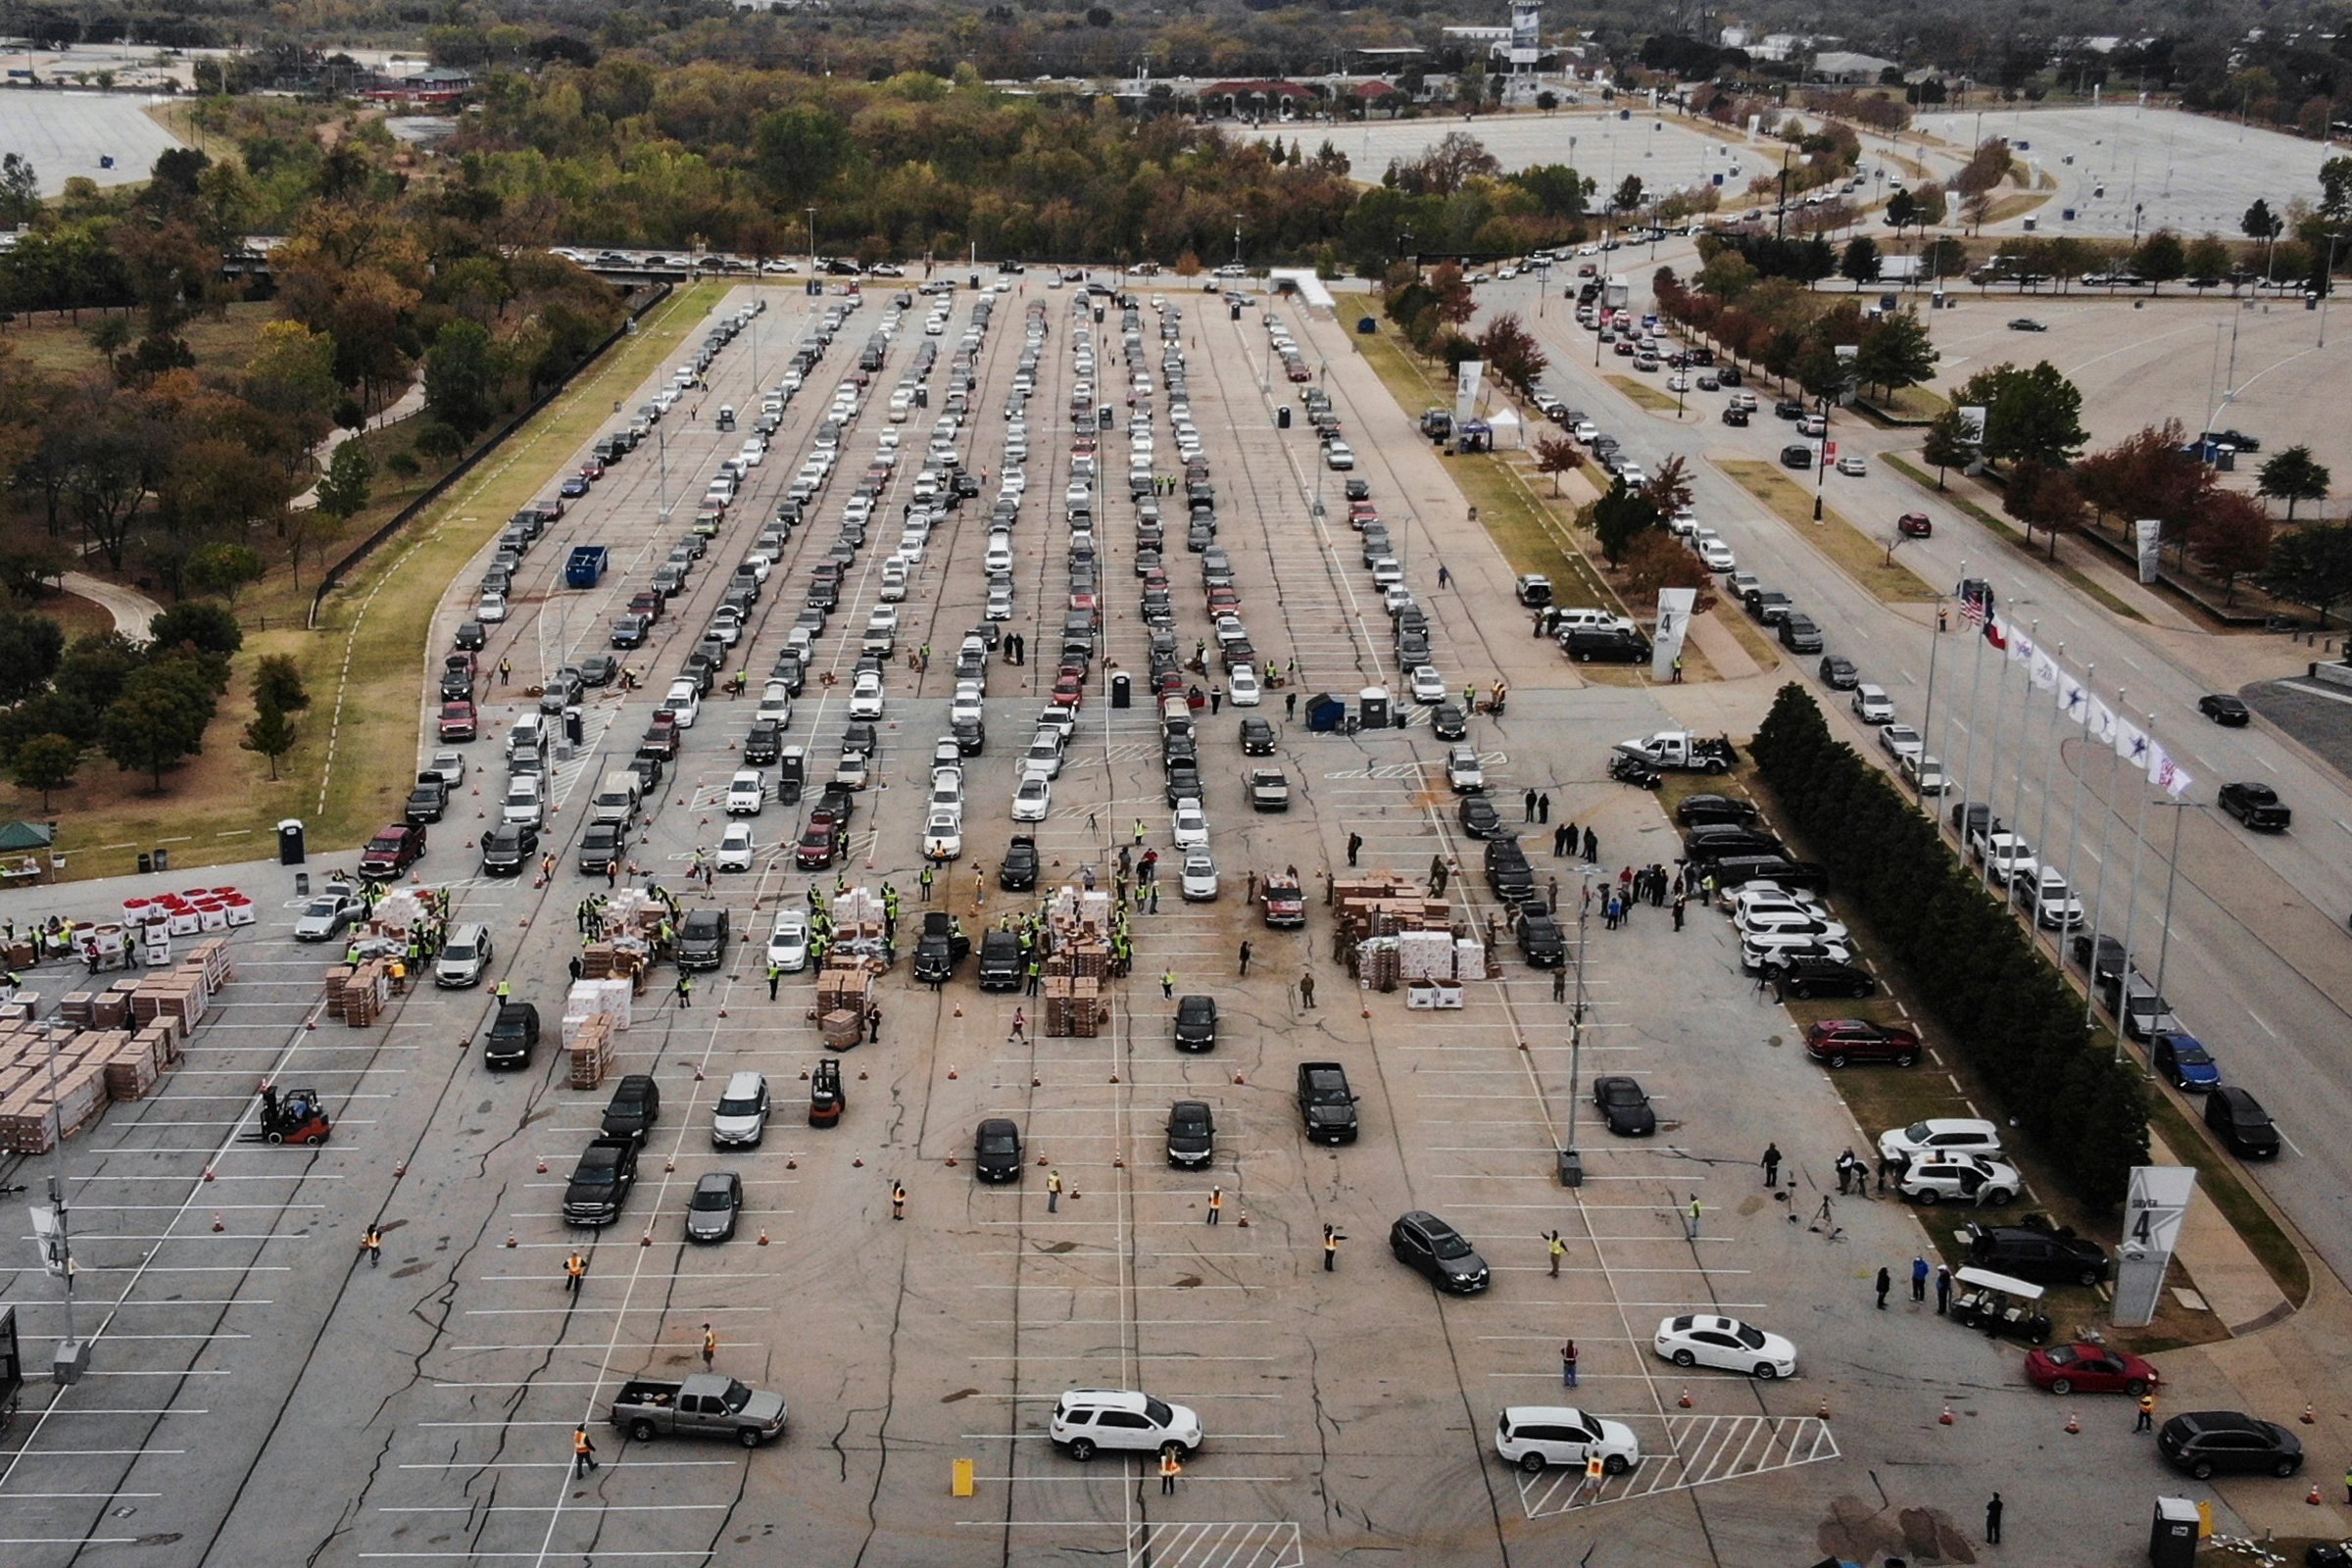 People line up in their cars to receive Thanksgiving meal boxes, which include a turkey and pantry items, from the Tarrant Area Food Bank in Arlington, Texas, on Nov. 20. (Yffy Yossifor—Star-Telegram/AP)